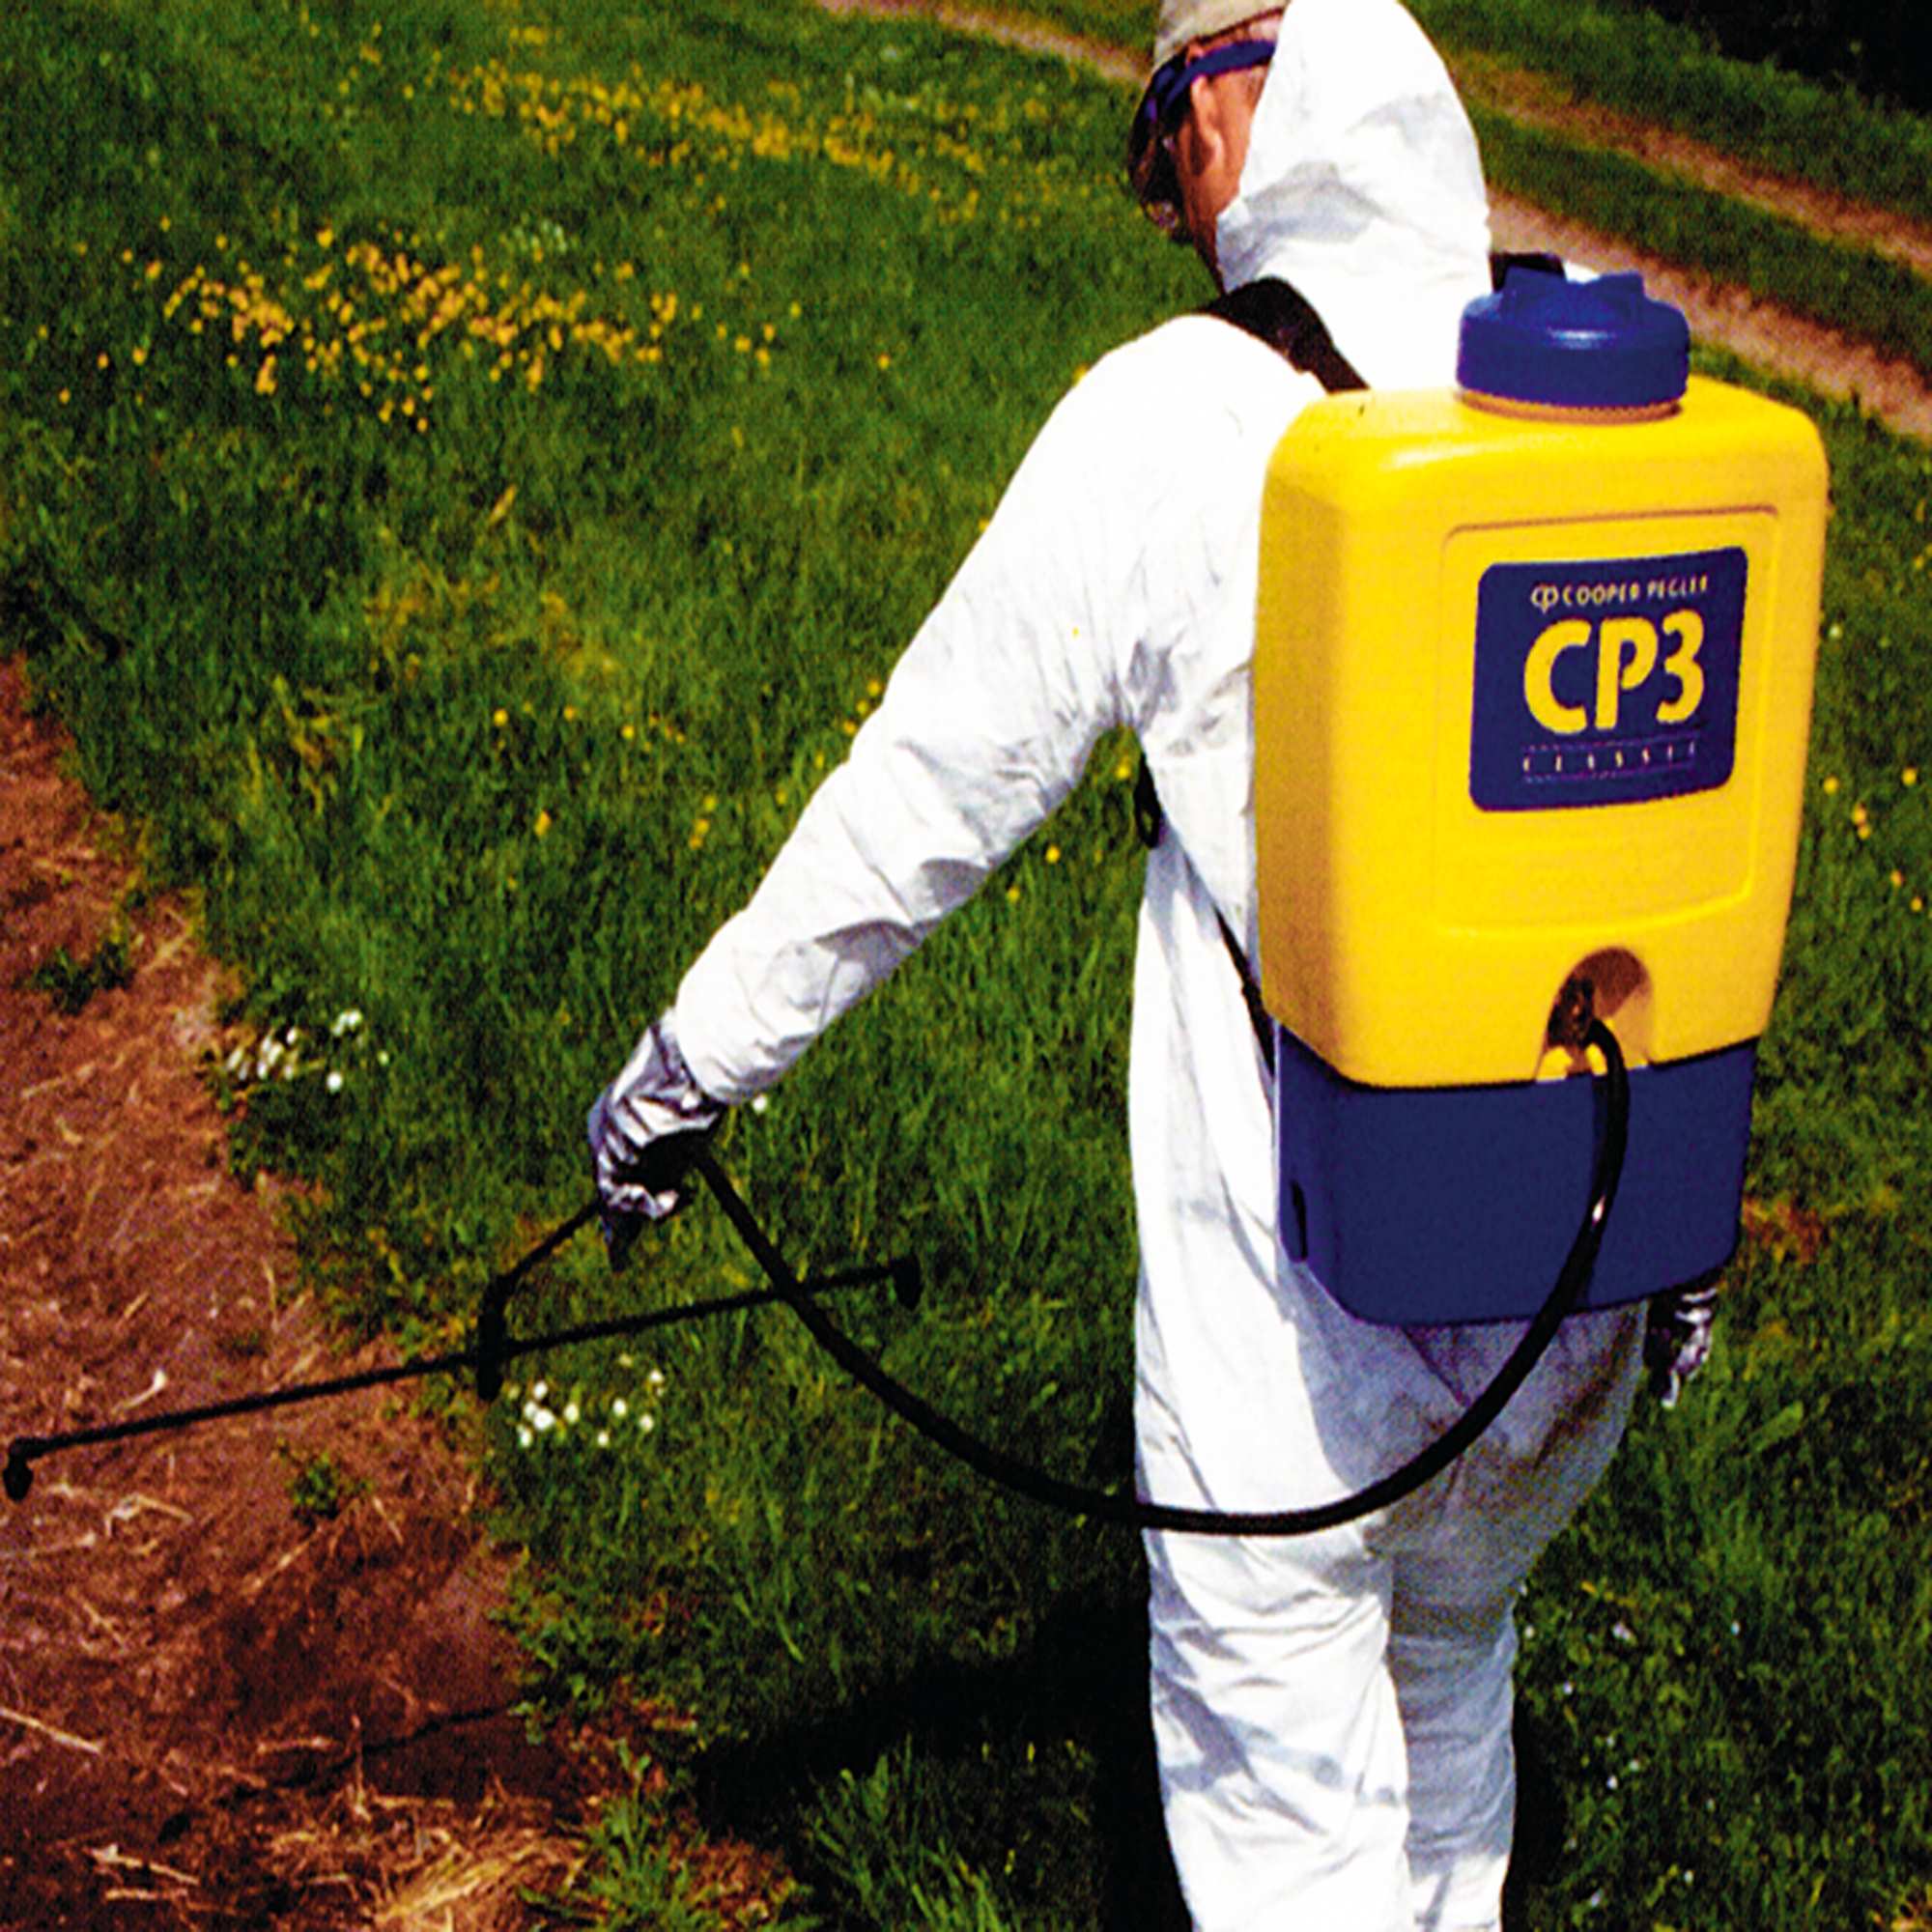 surfactant for insecticides and pesticides